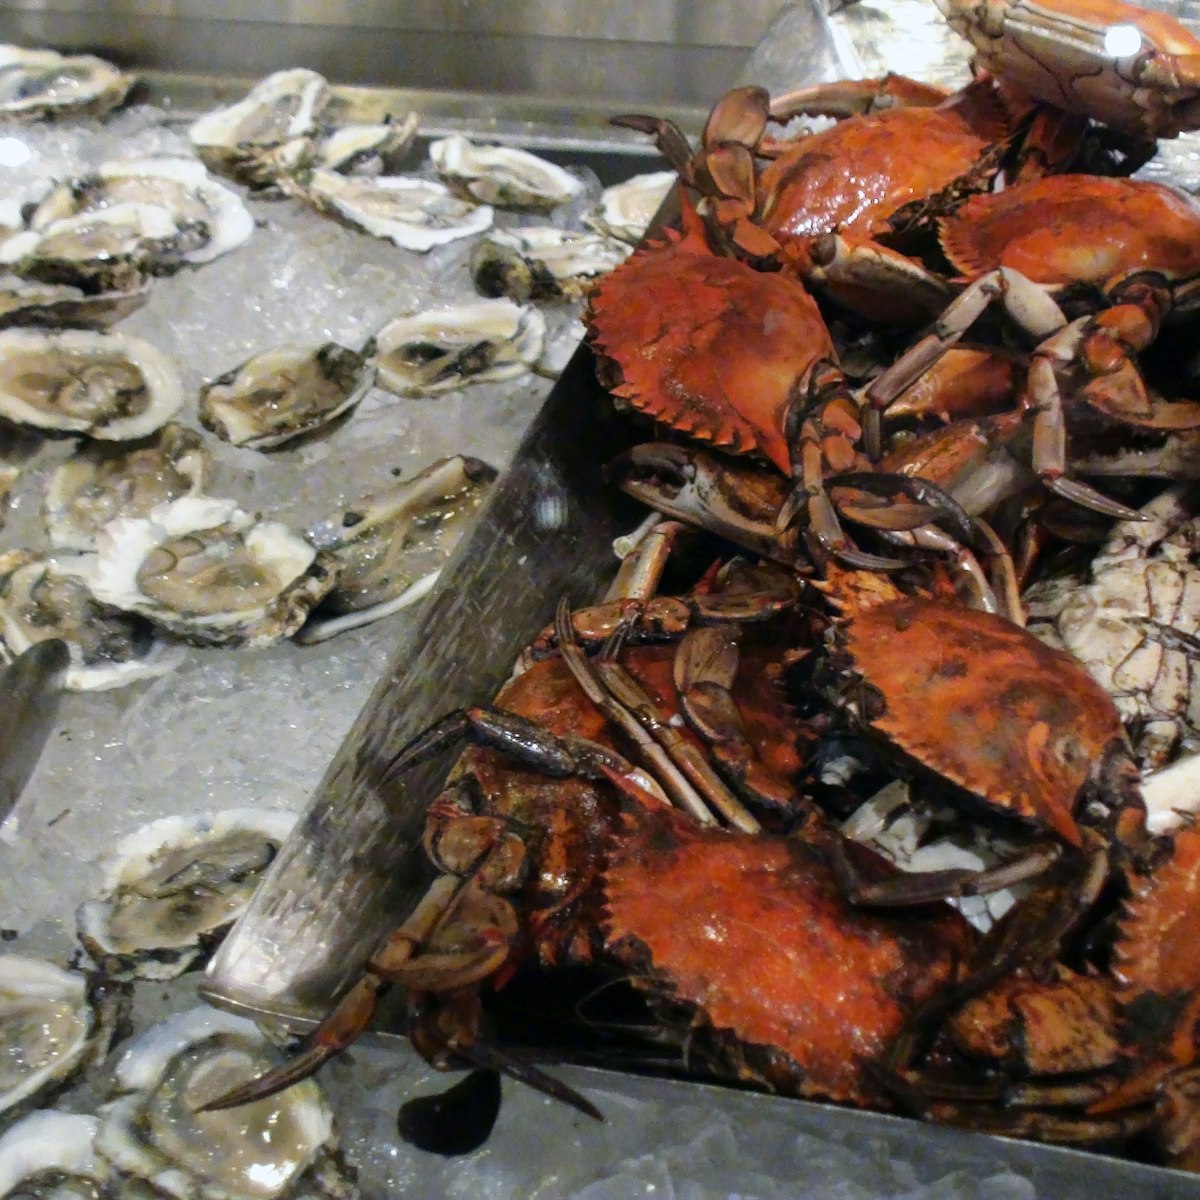 Prepared Seafood Crab And Oysters Ready For Eating In A Restaurant